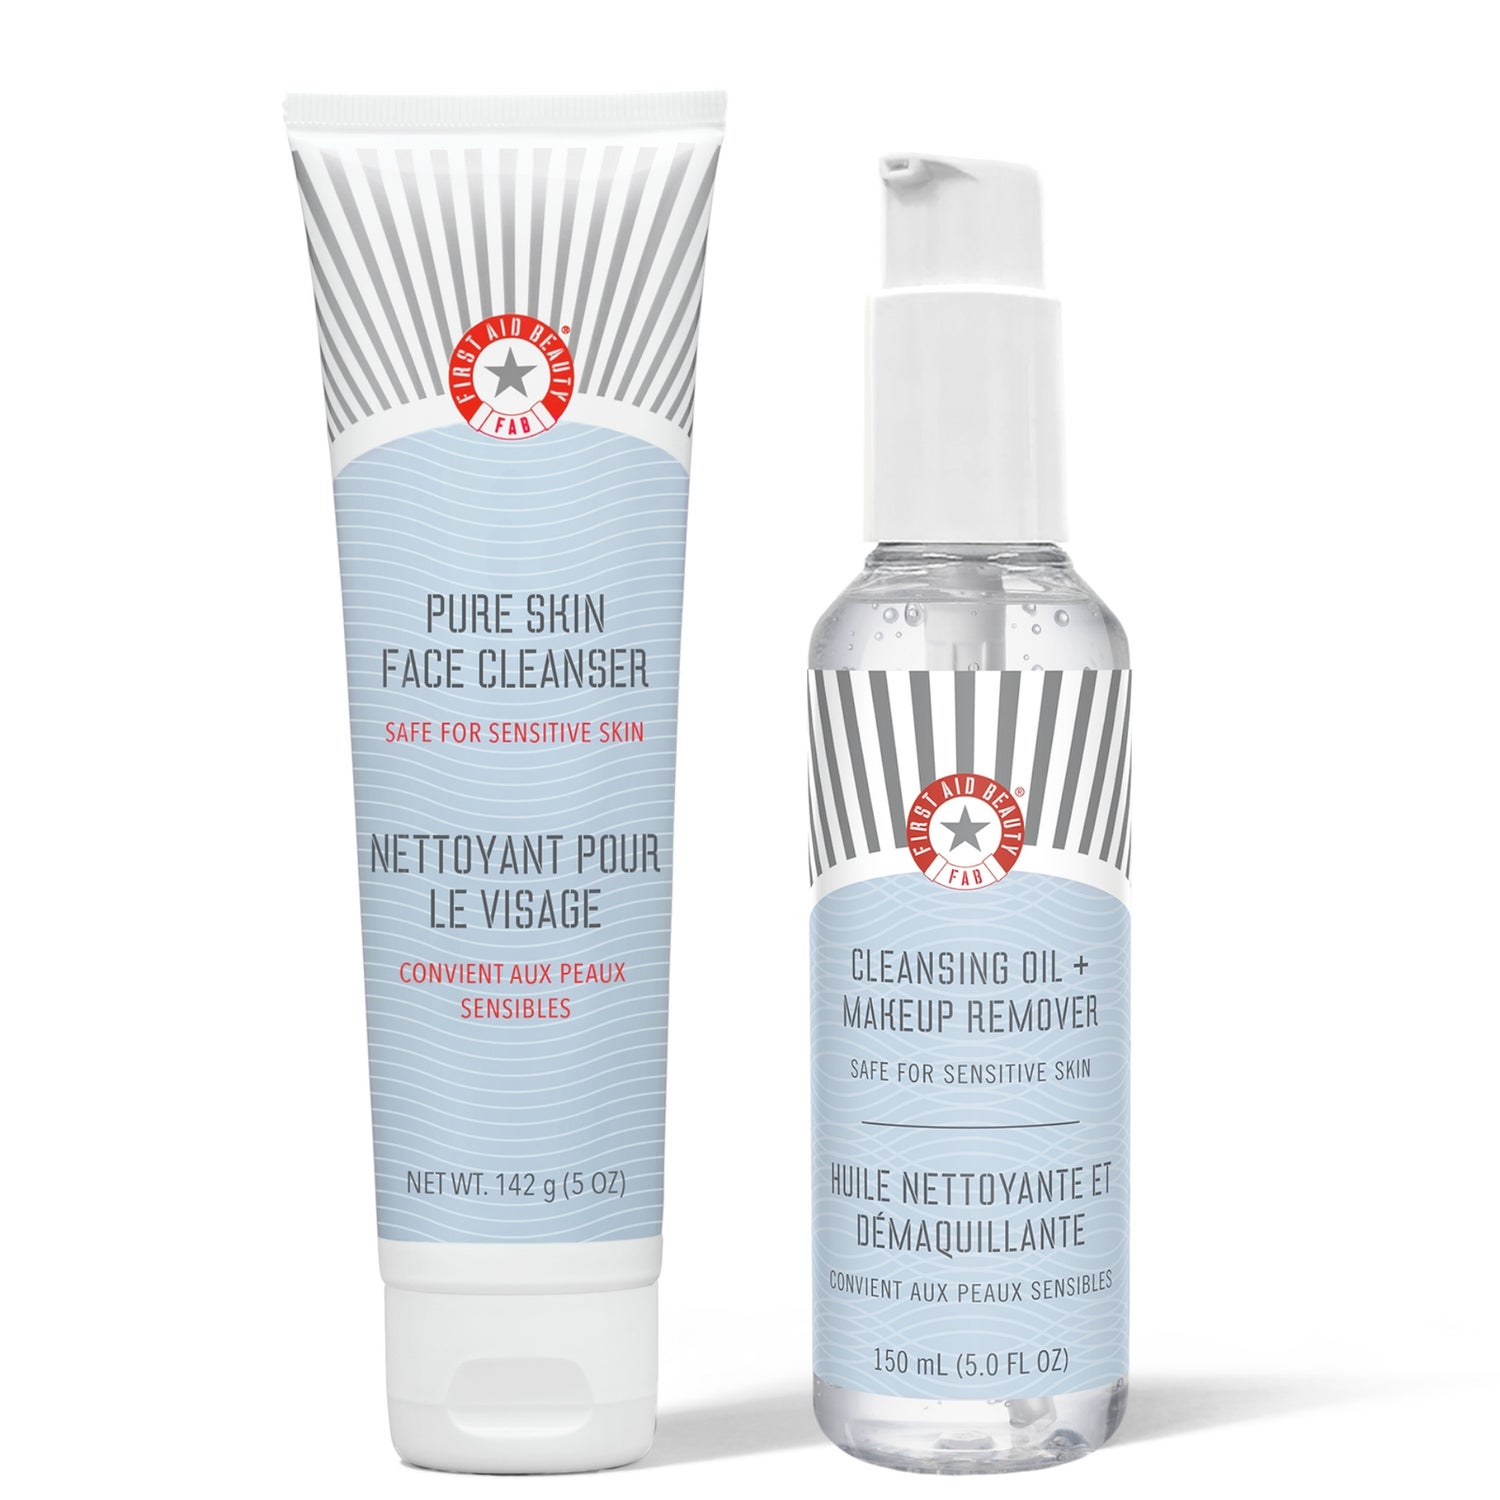 First Aid Beauty Double Cleanse Bundle ($50 Value)